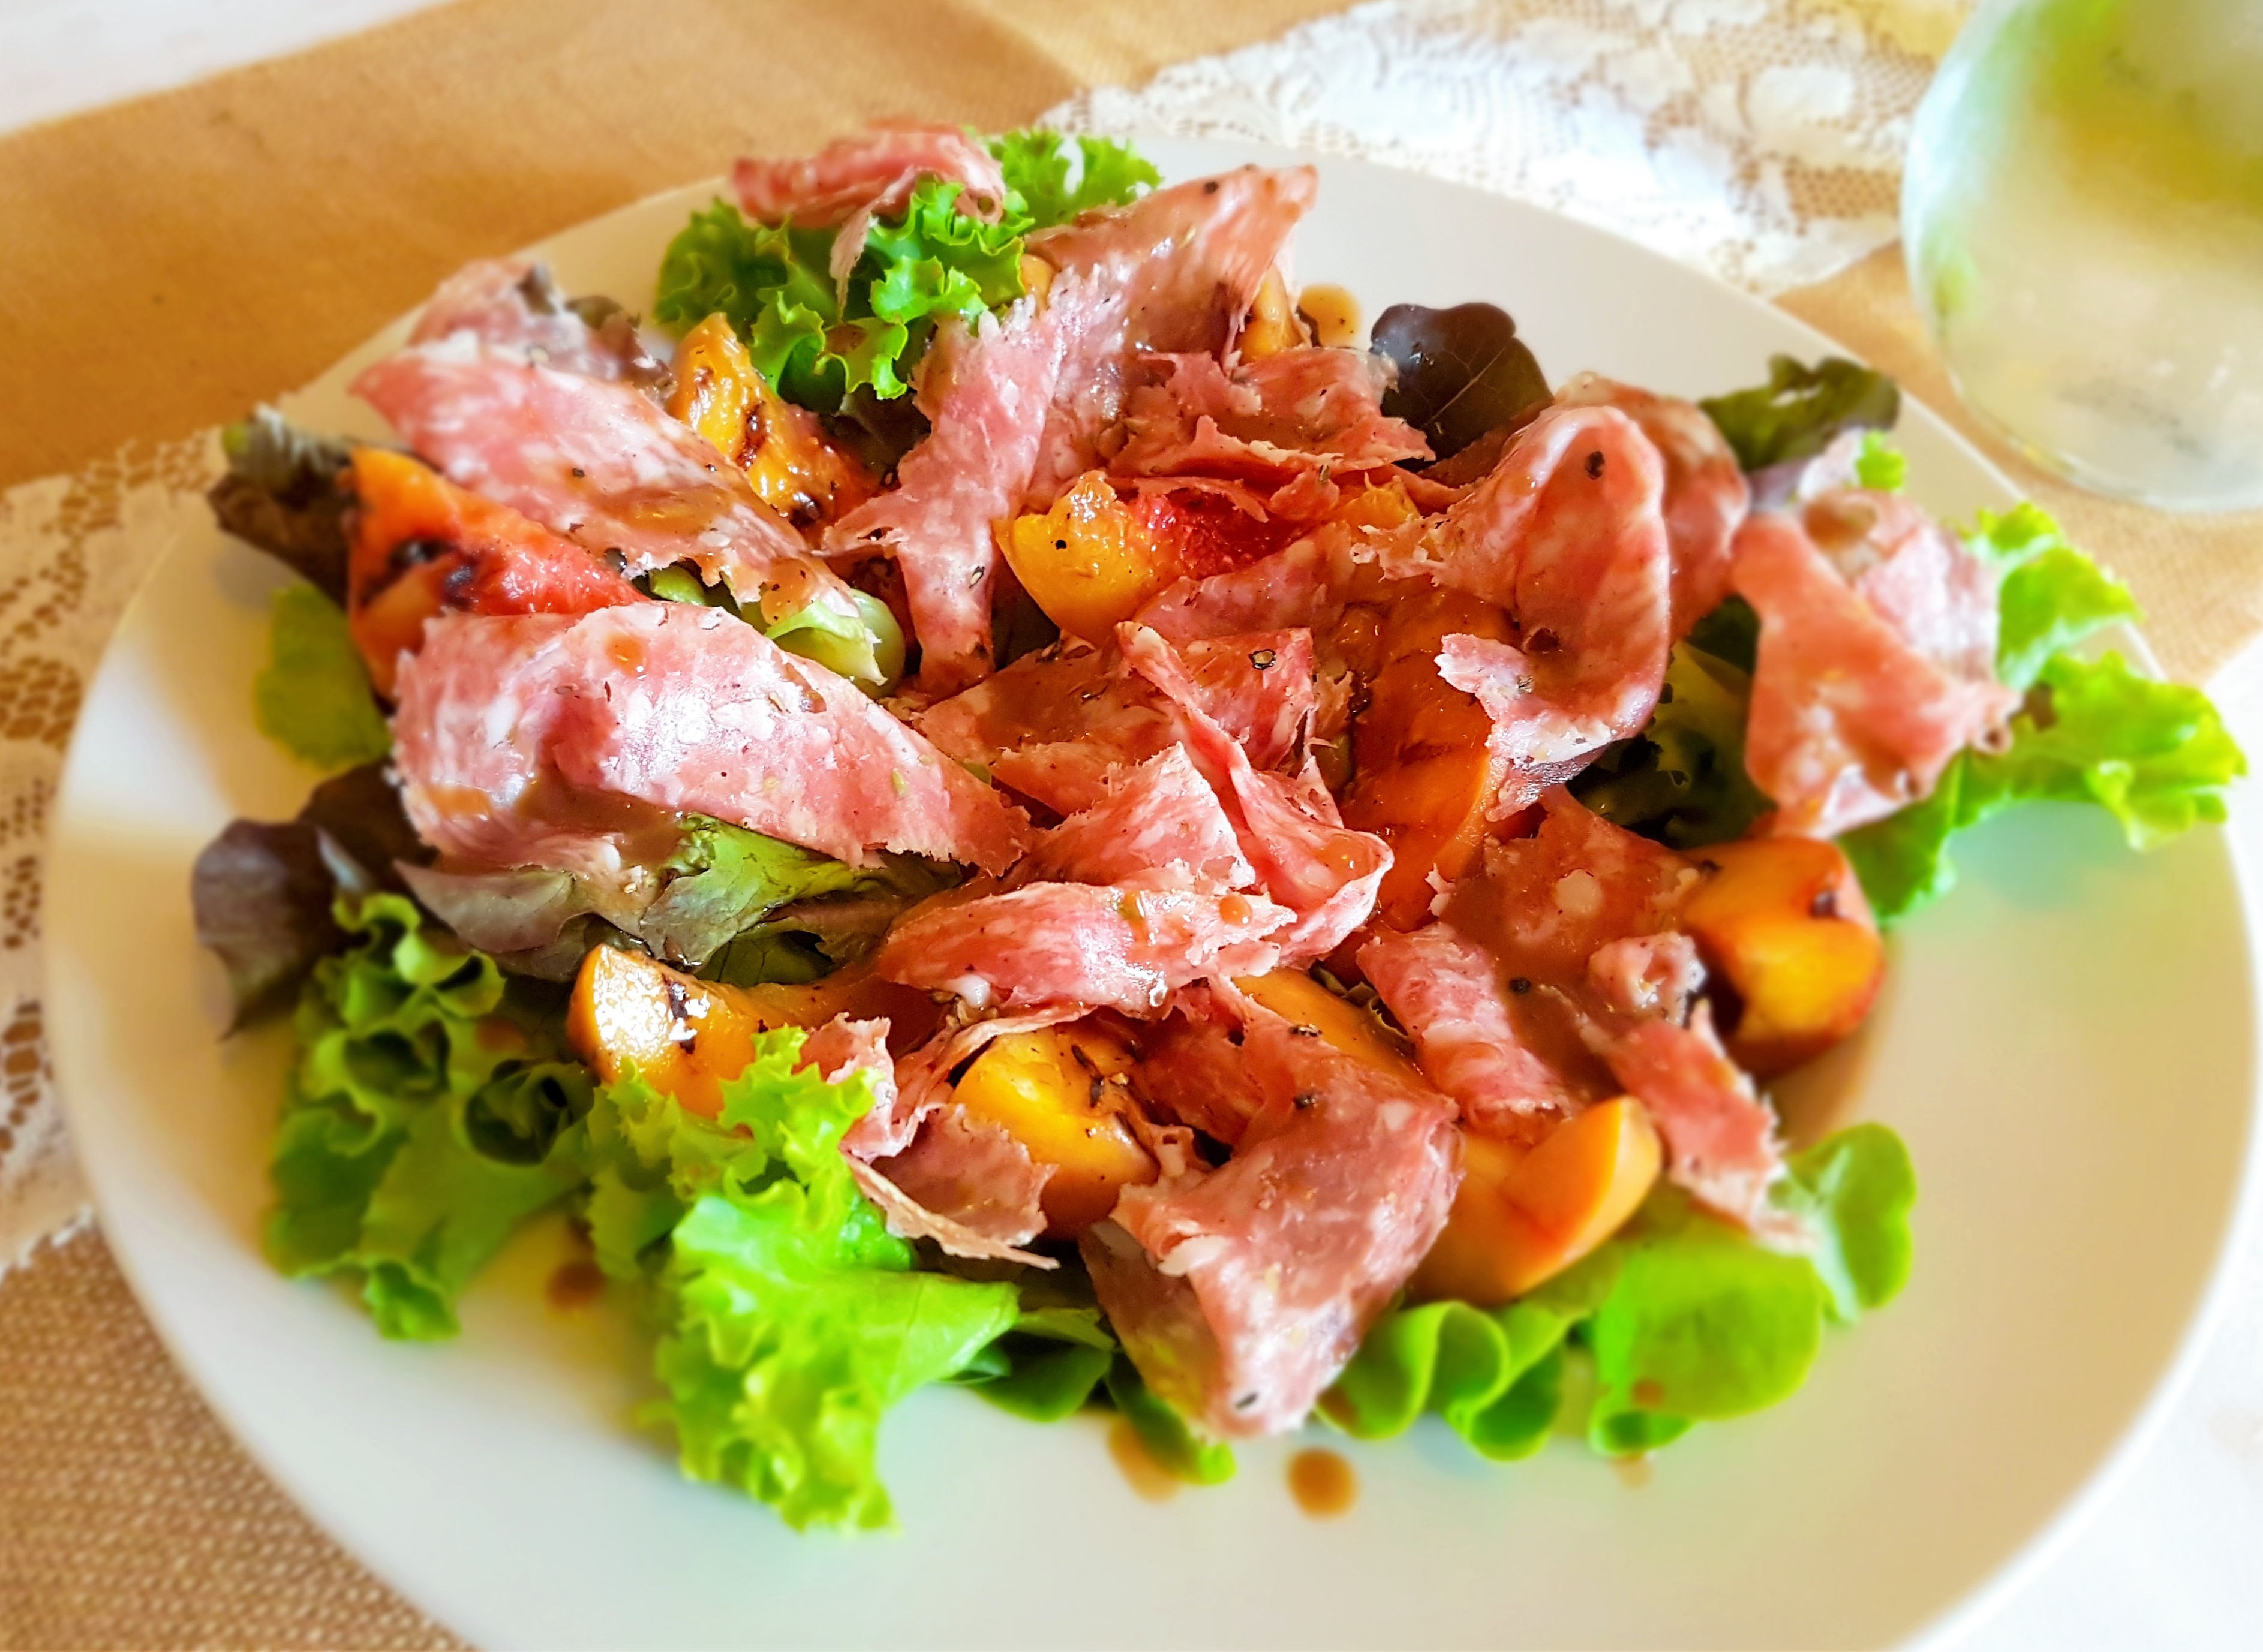 Grilled peach and finocchiona salad at our vacation rental in Tuscany